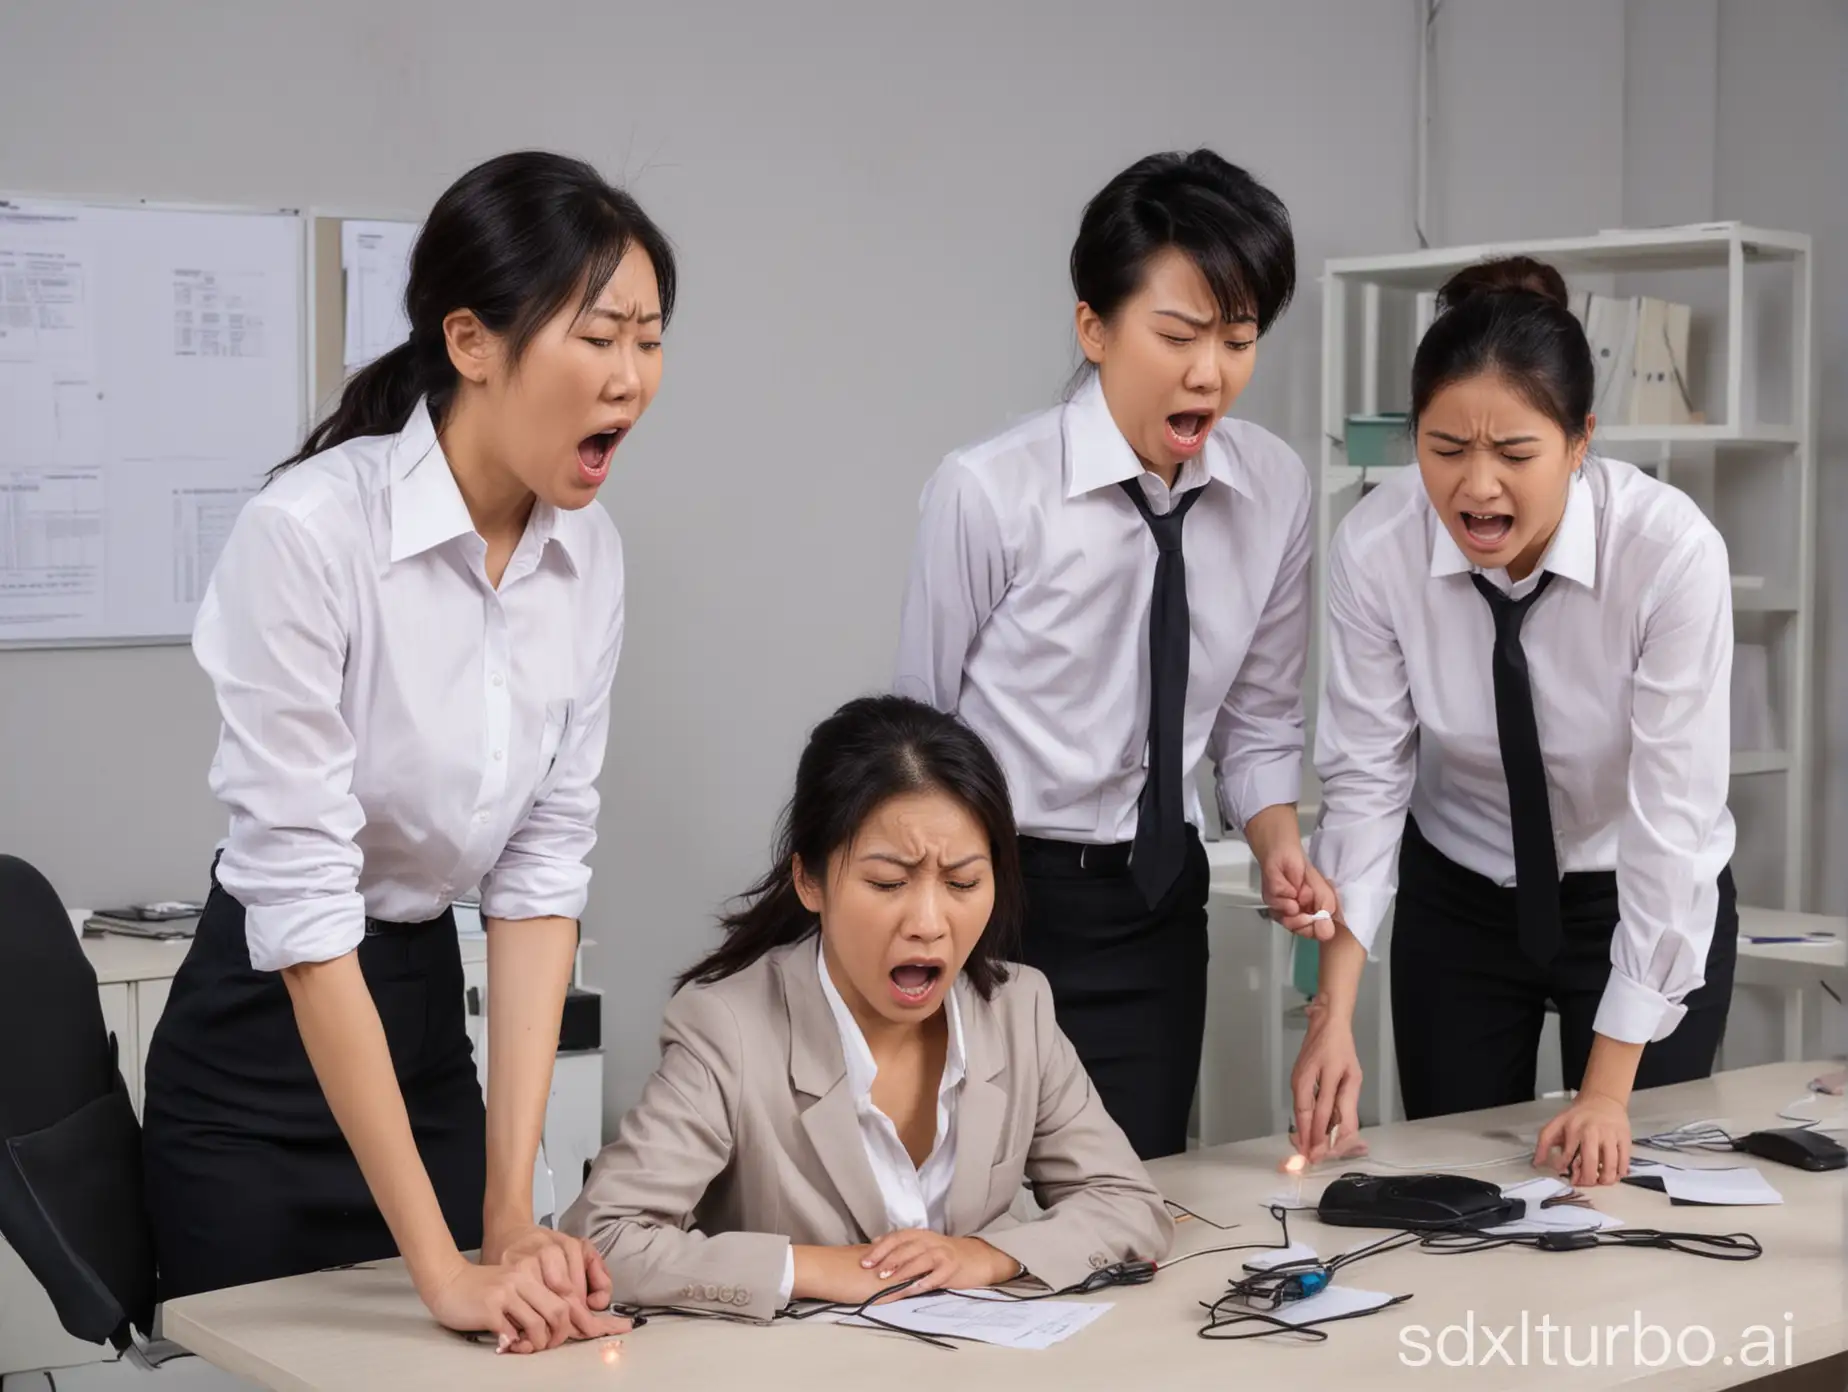 a Asian woman in office attire was struck by an electric shock in the office, the woman is in pain and three colleagues of a boy are looking on in panic